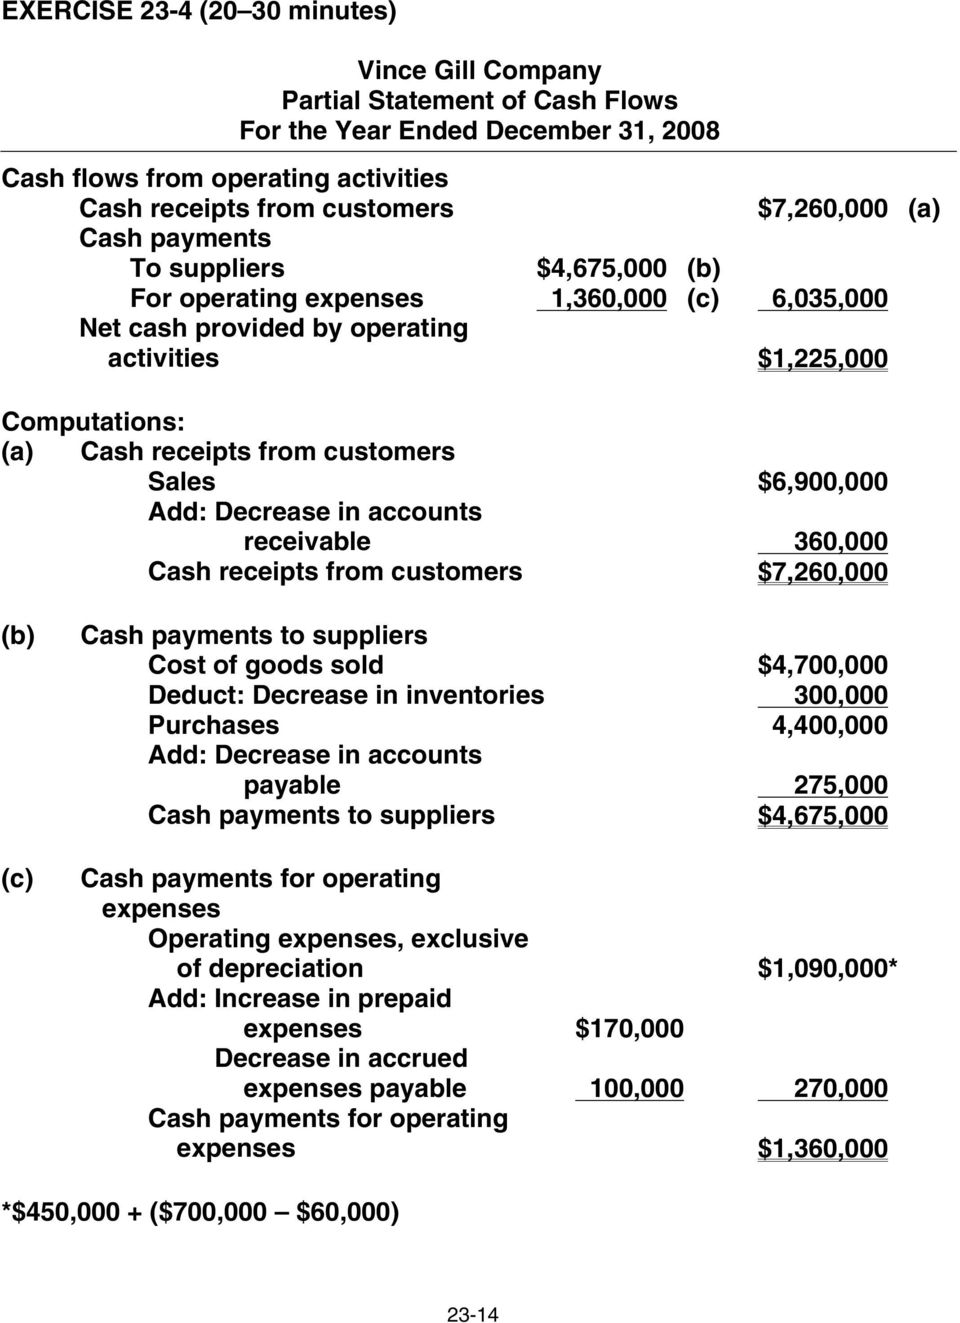 $6,900,000 Add: Decrease in accounts Add: receivable 360,000 Cash receipts from customers $7,260,000 (b) (c) Cash payments to suppliers Cost of goods sold $4,700,000 Deduct: Decrease in inventories